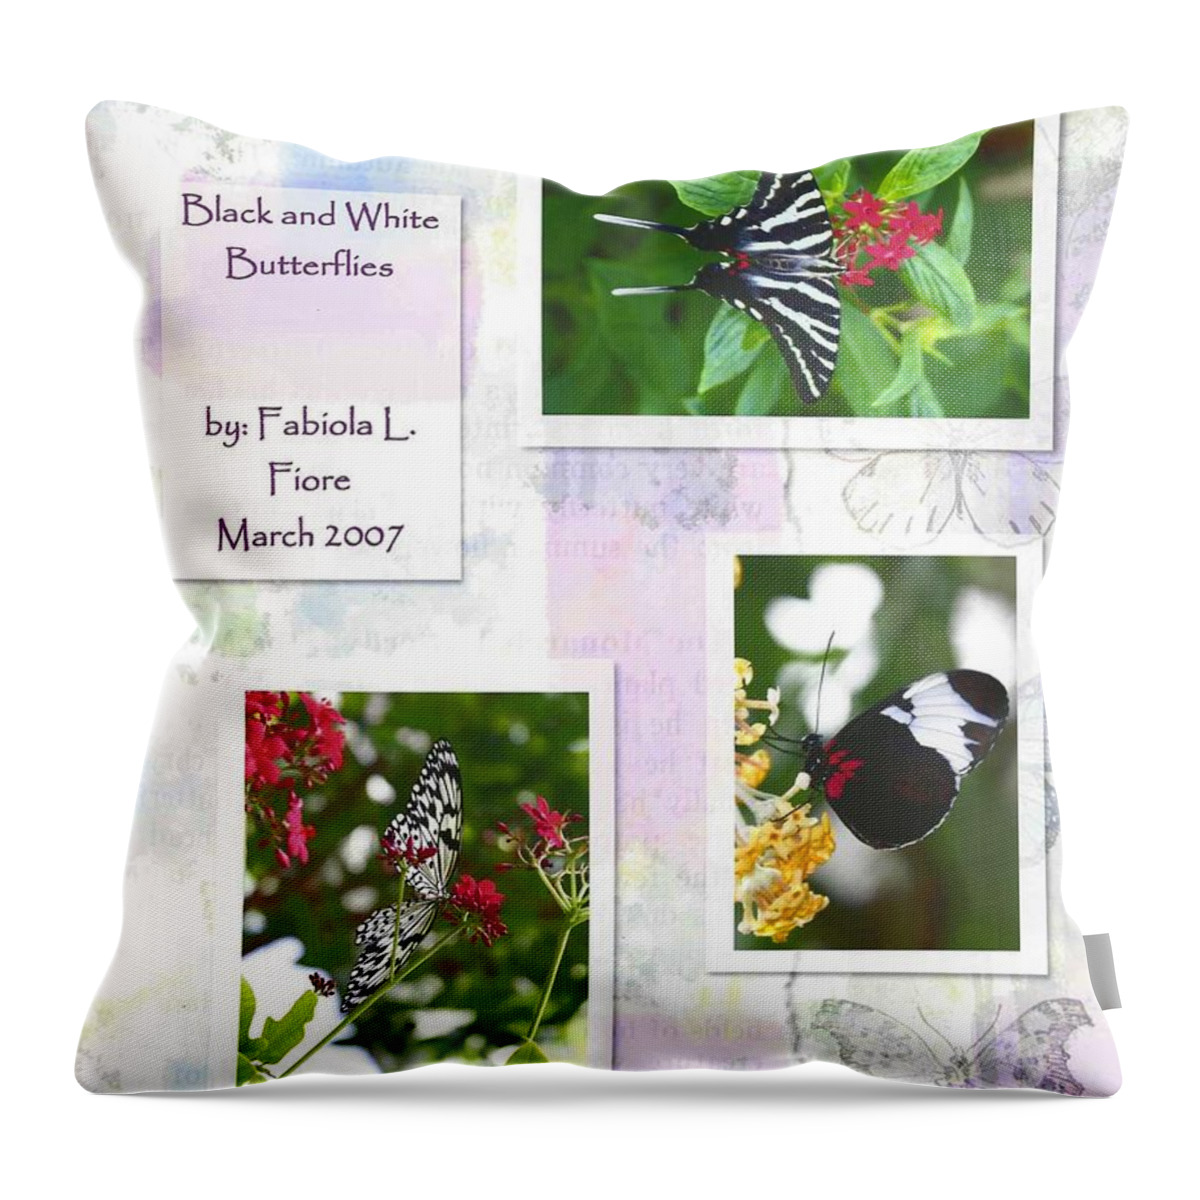 Photography Throw Pillow featuring the photograph Black and White Butterflies No. 1 by Fabiola L Nadjar Fiore